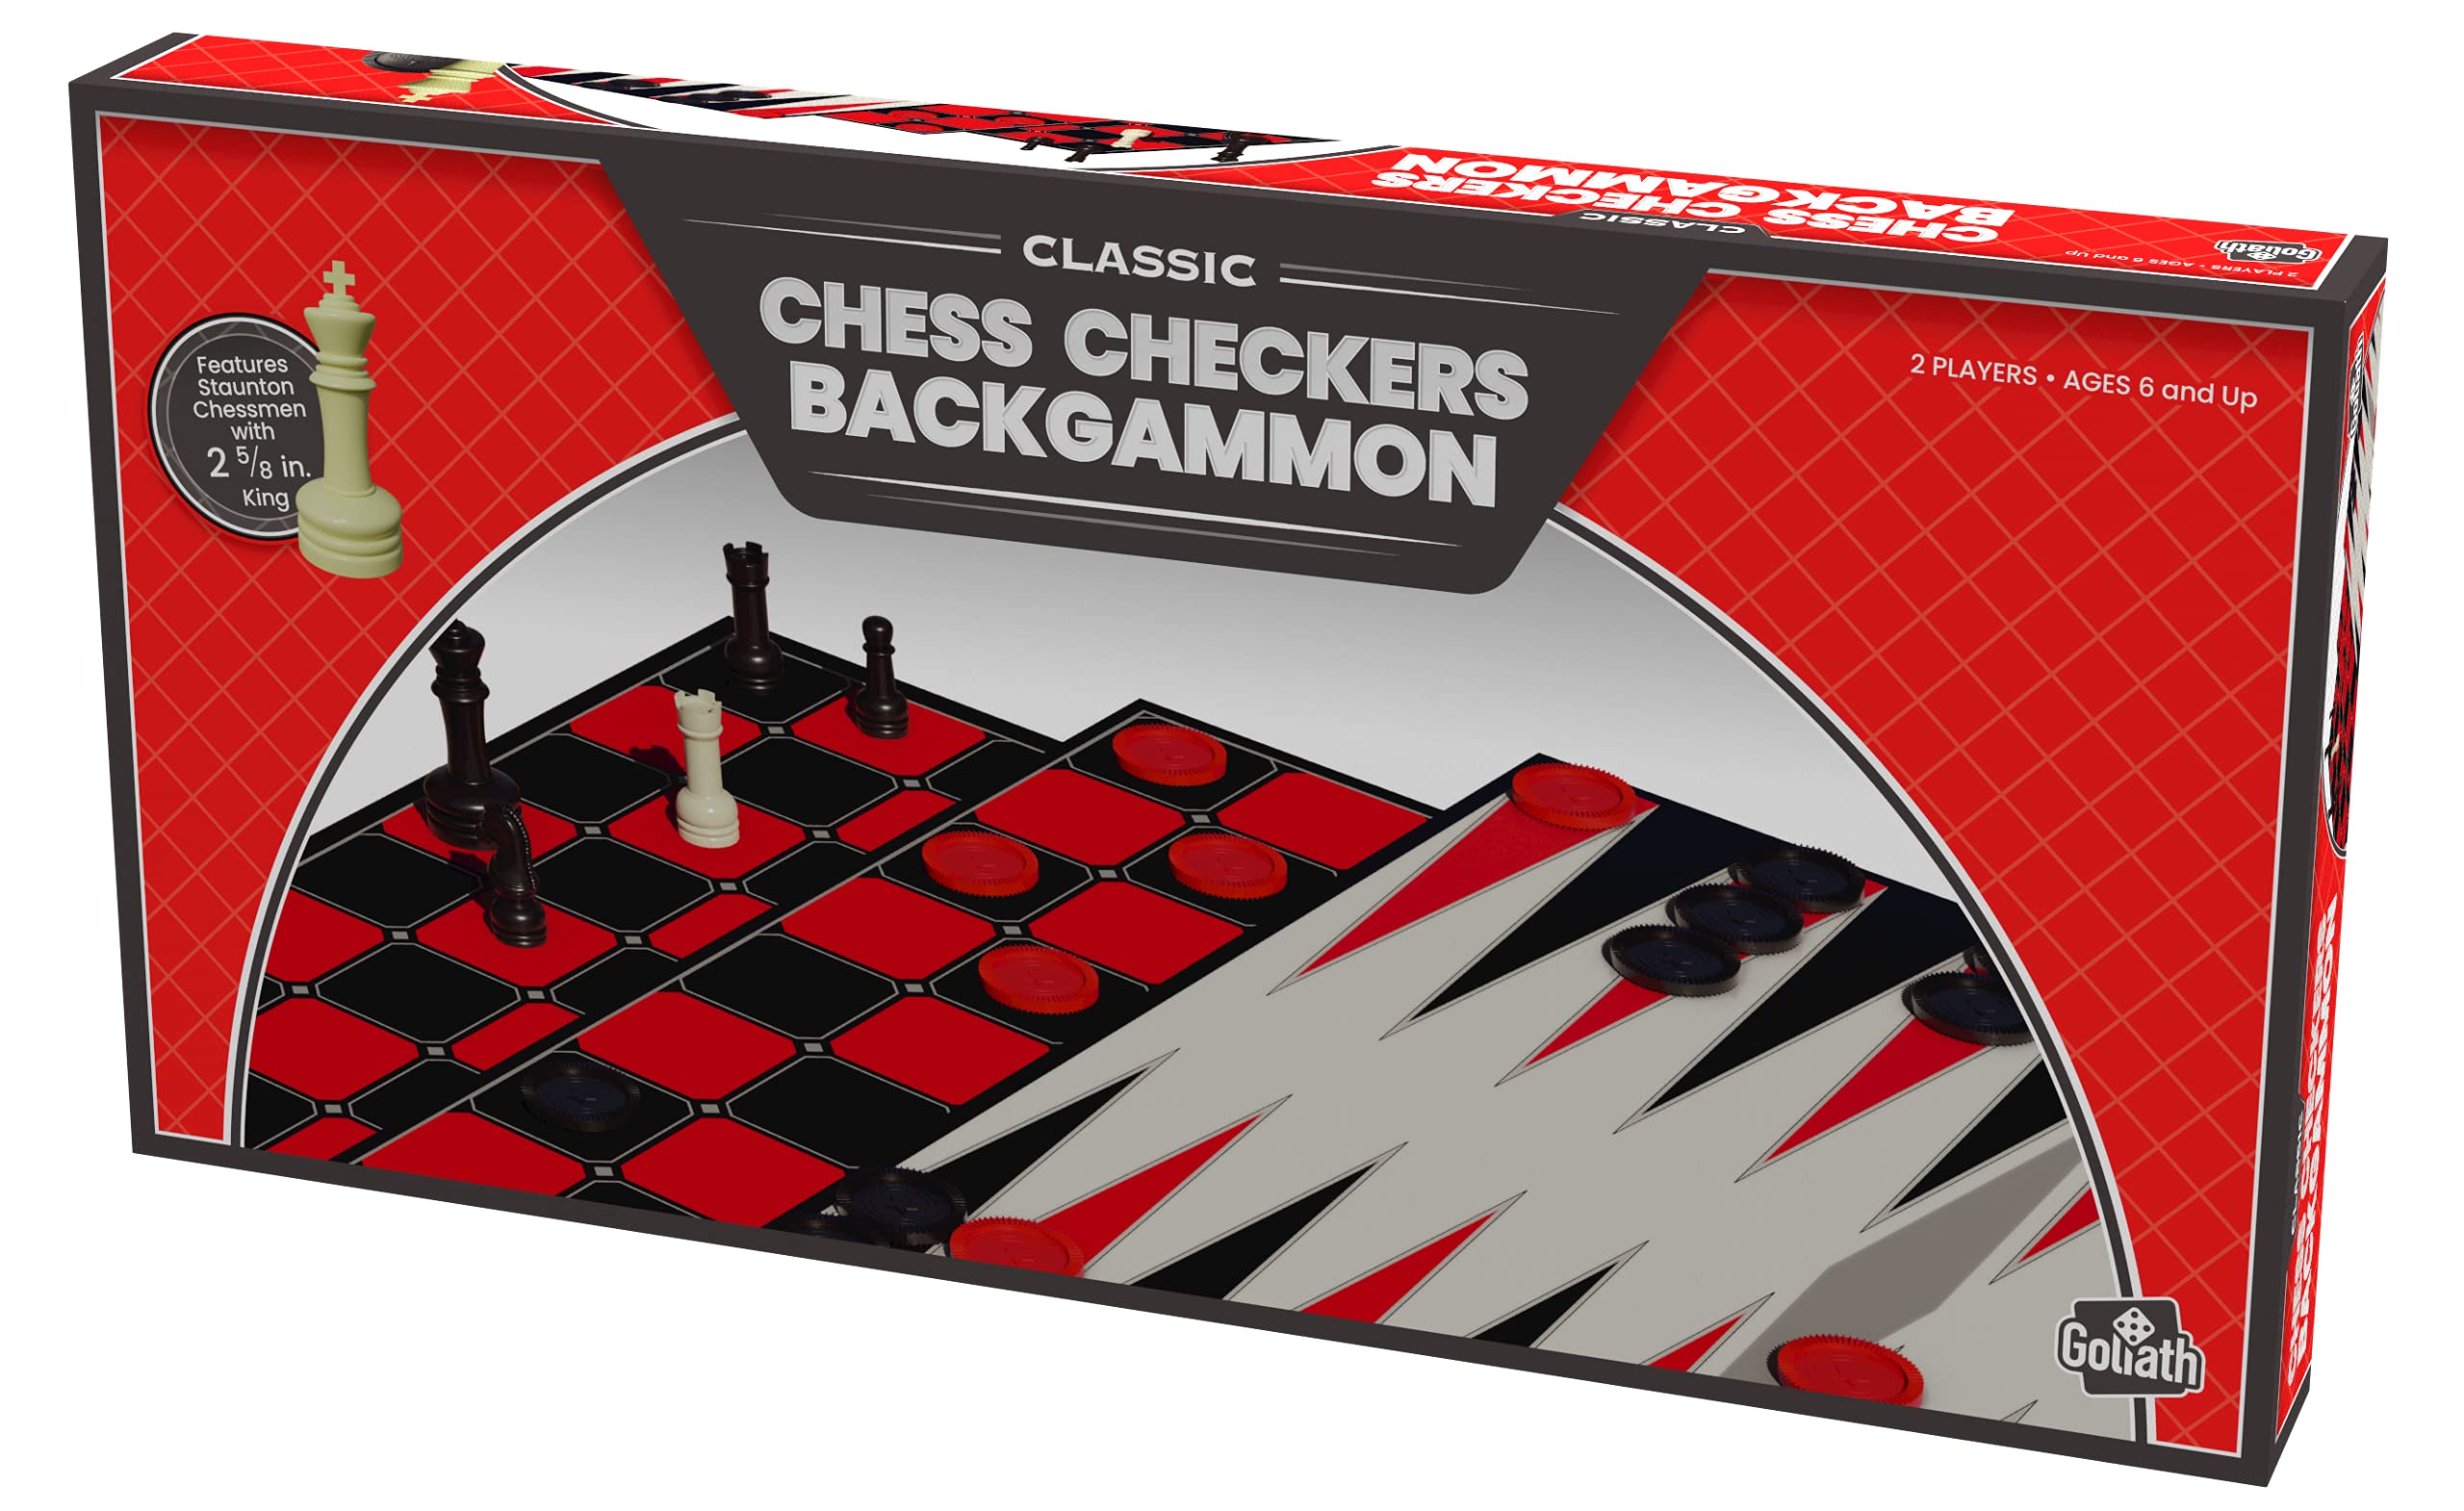 Goliath Chess/Checkers/Backgammon (Amazon Exclusive) - 3 Games in One with Full Size Staunton Chess Pieces and Interlocking Checkers